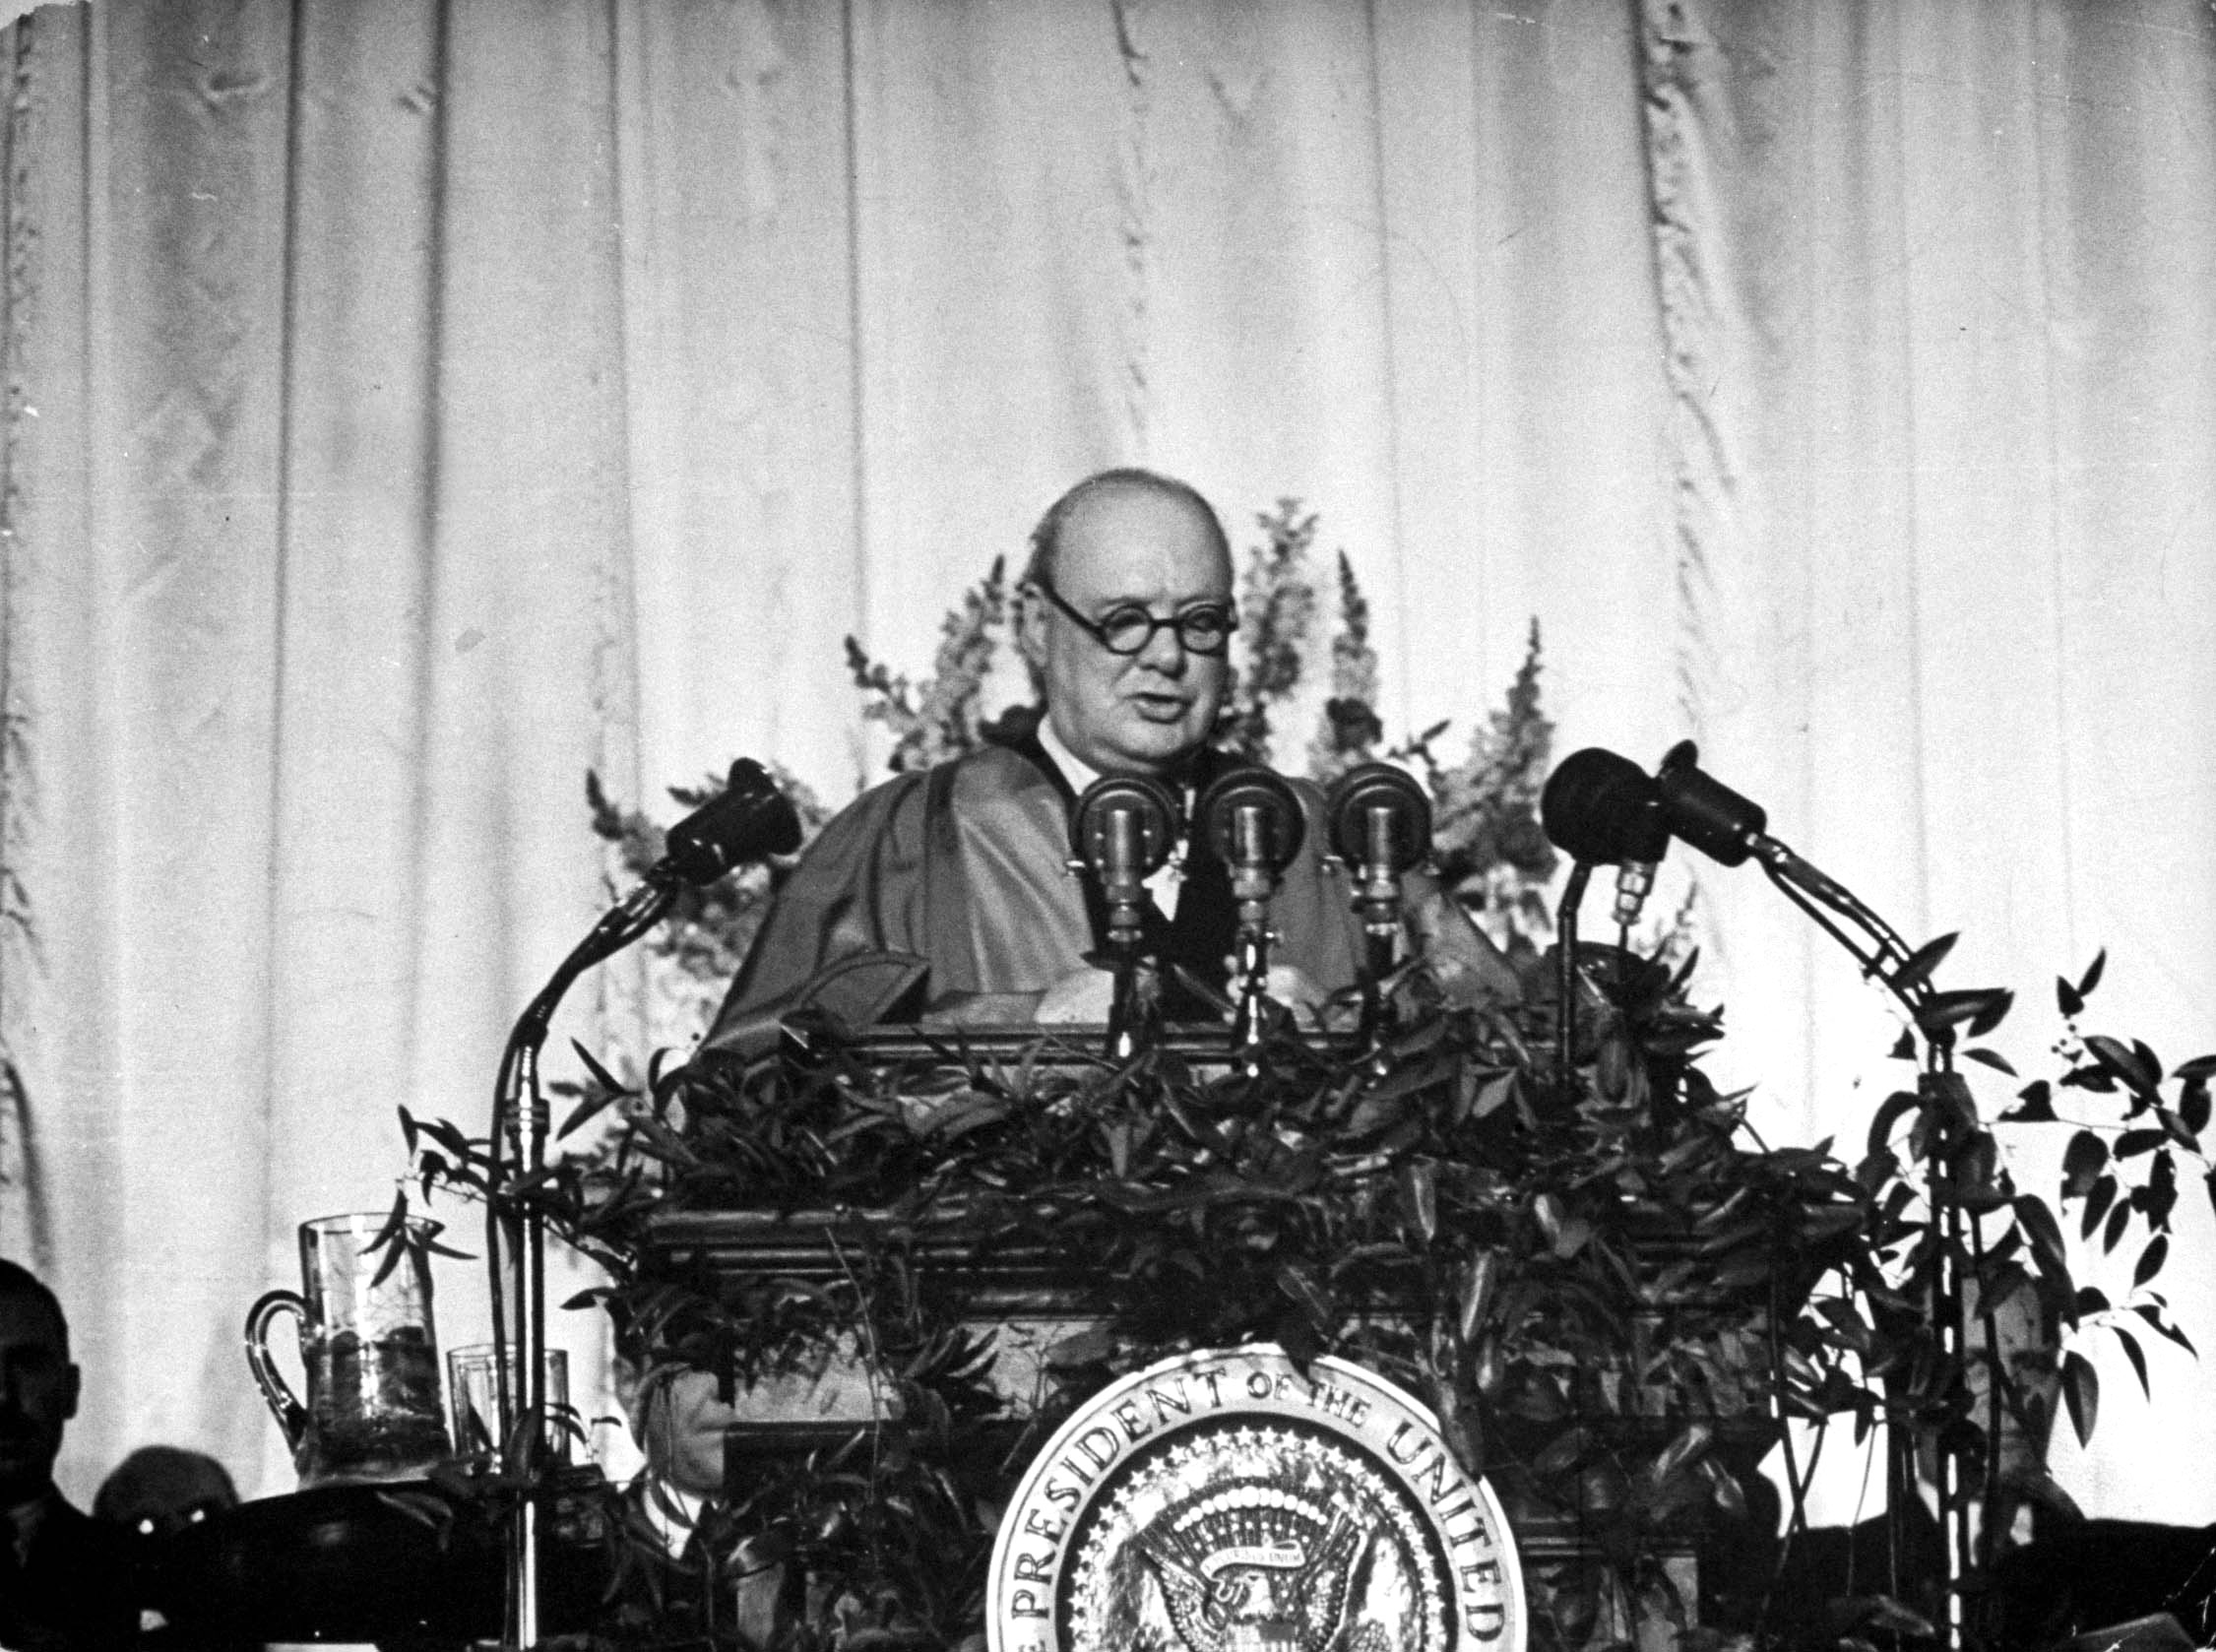 Churchill speaks in the gym from a rostrum decorated with shrubs and radio microphones. His small audience sat on hard, borrowed bleachers.